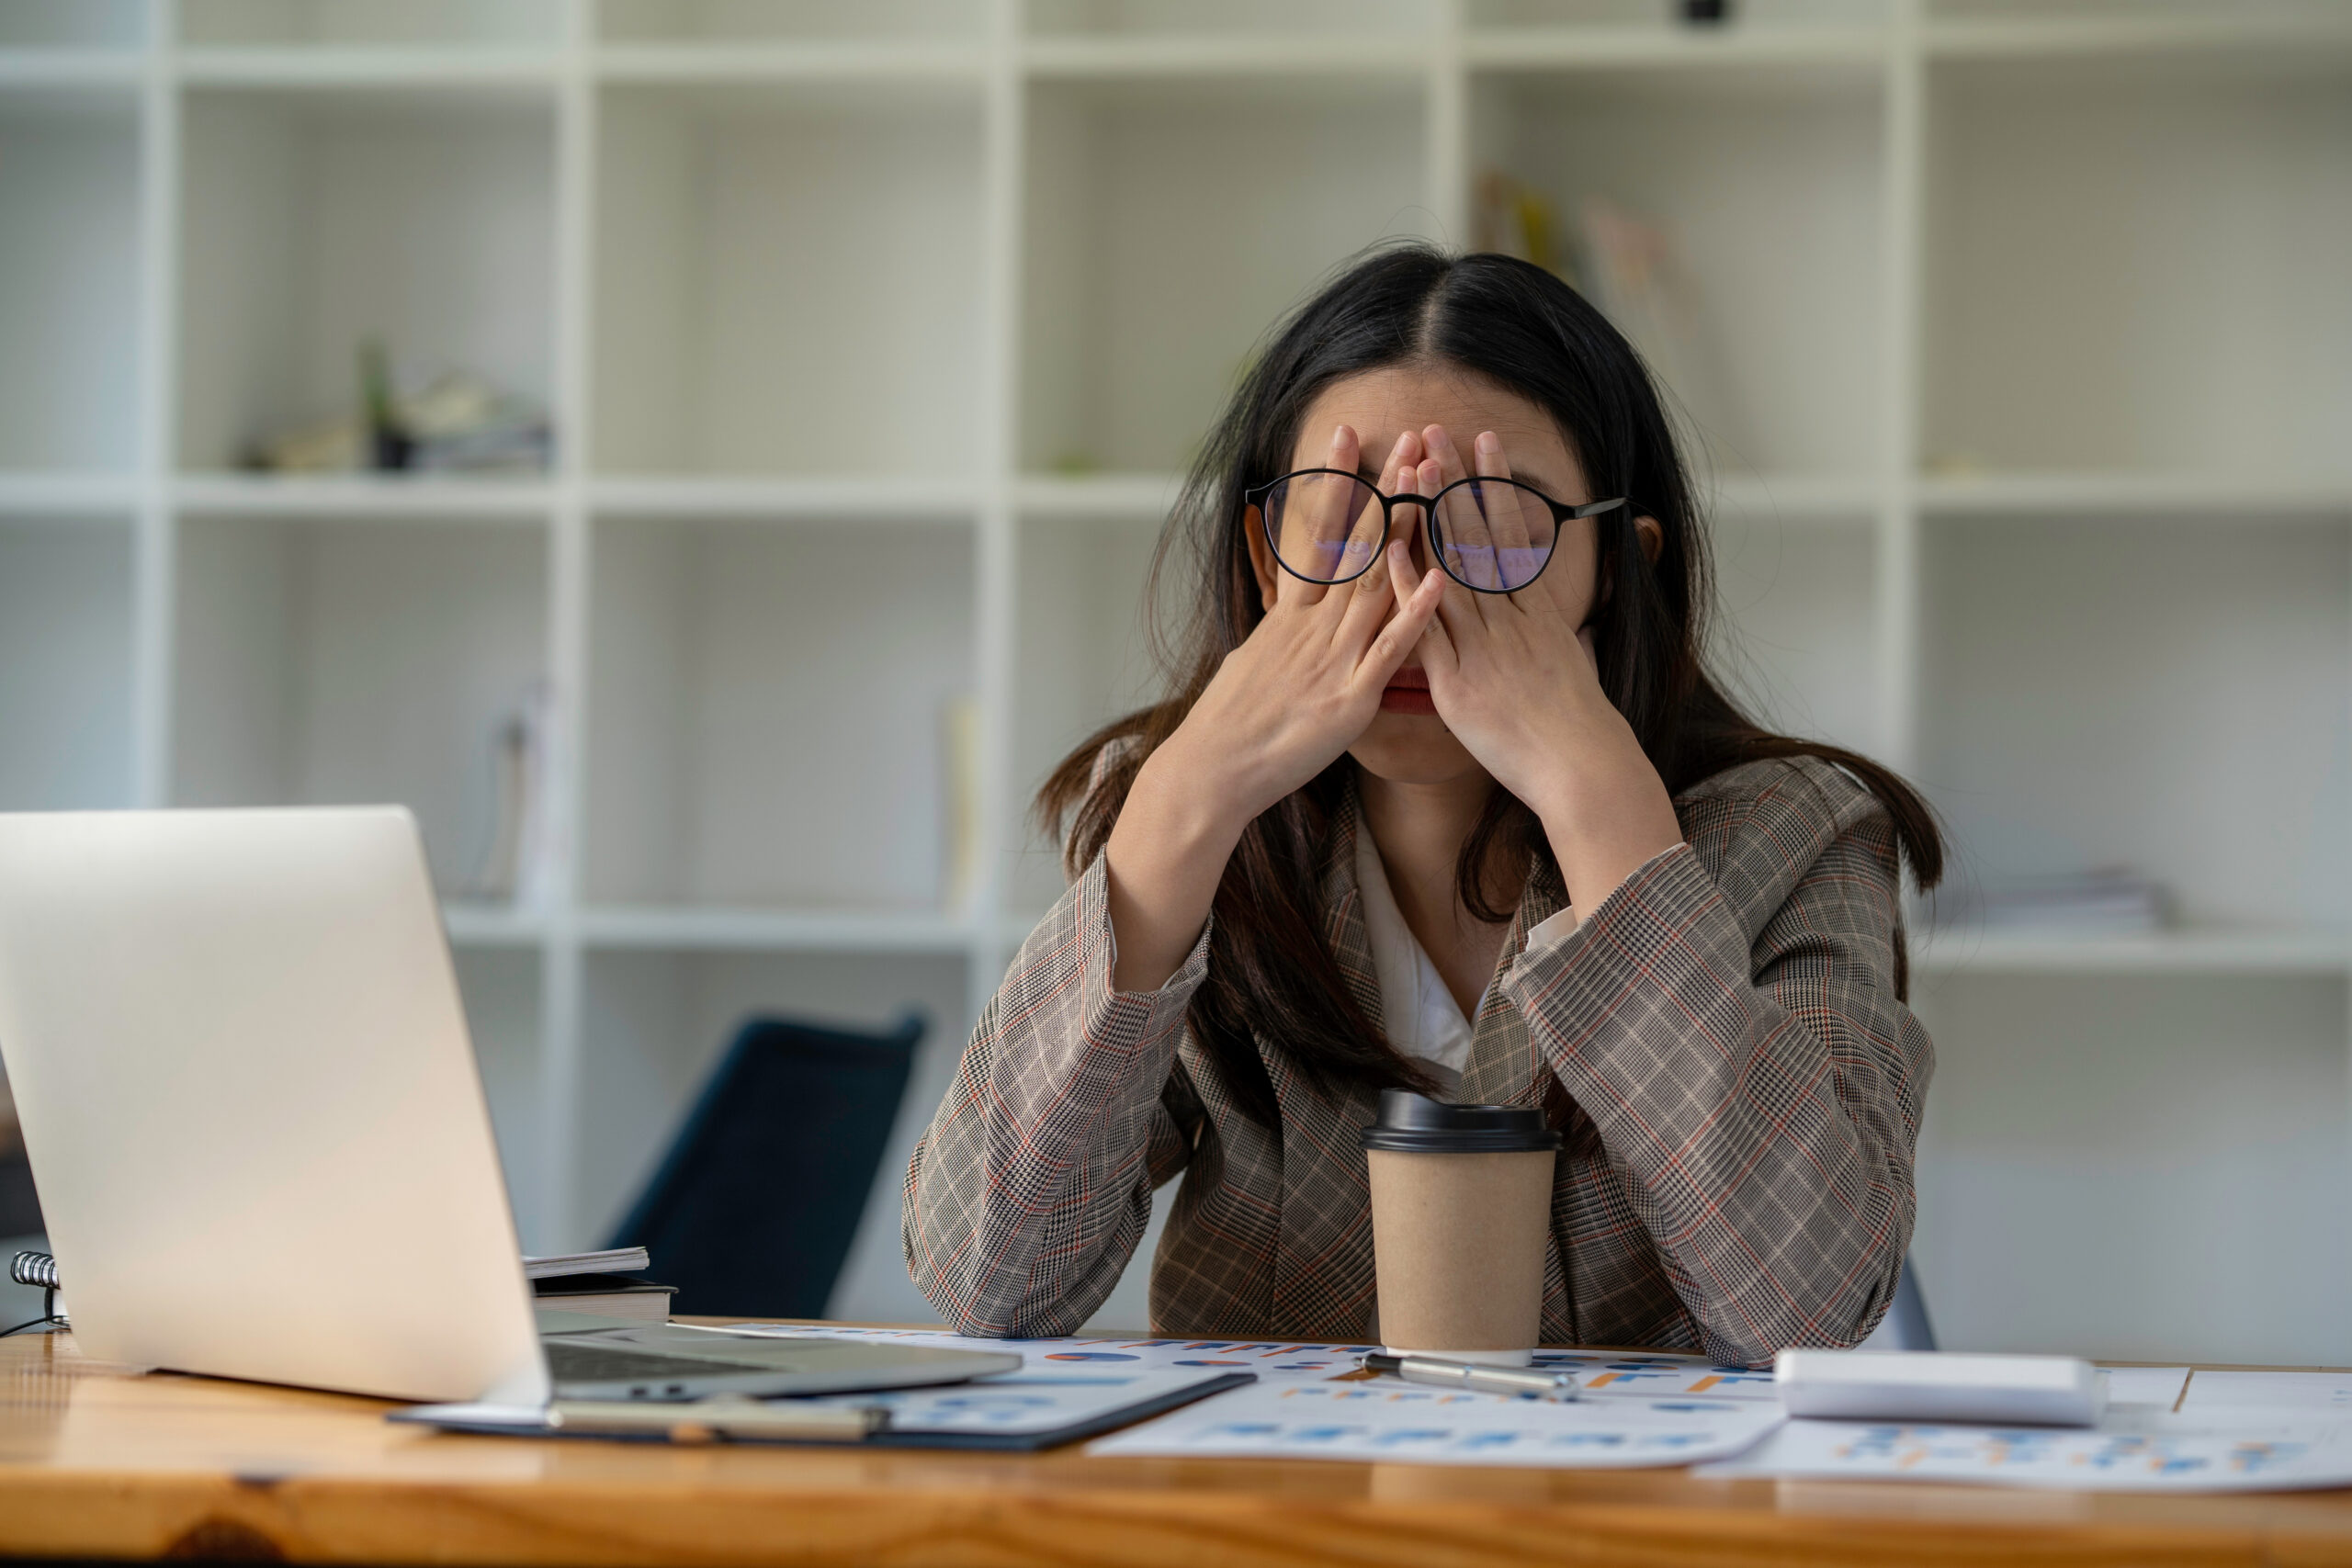 business woman sitting at a desk with hands to her face showing sadness or fatigue